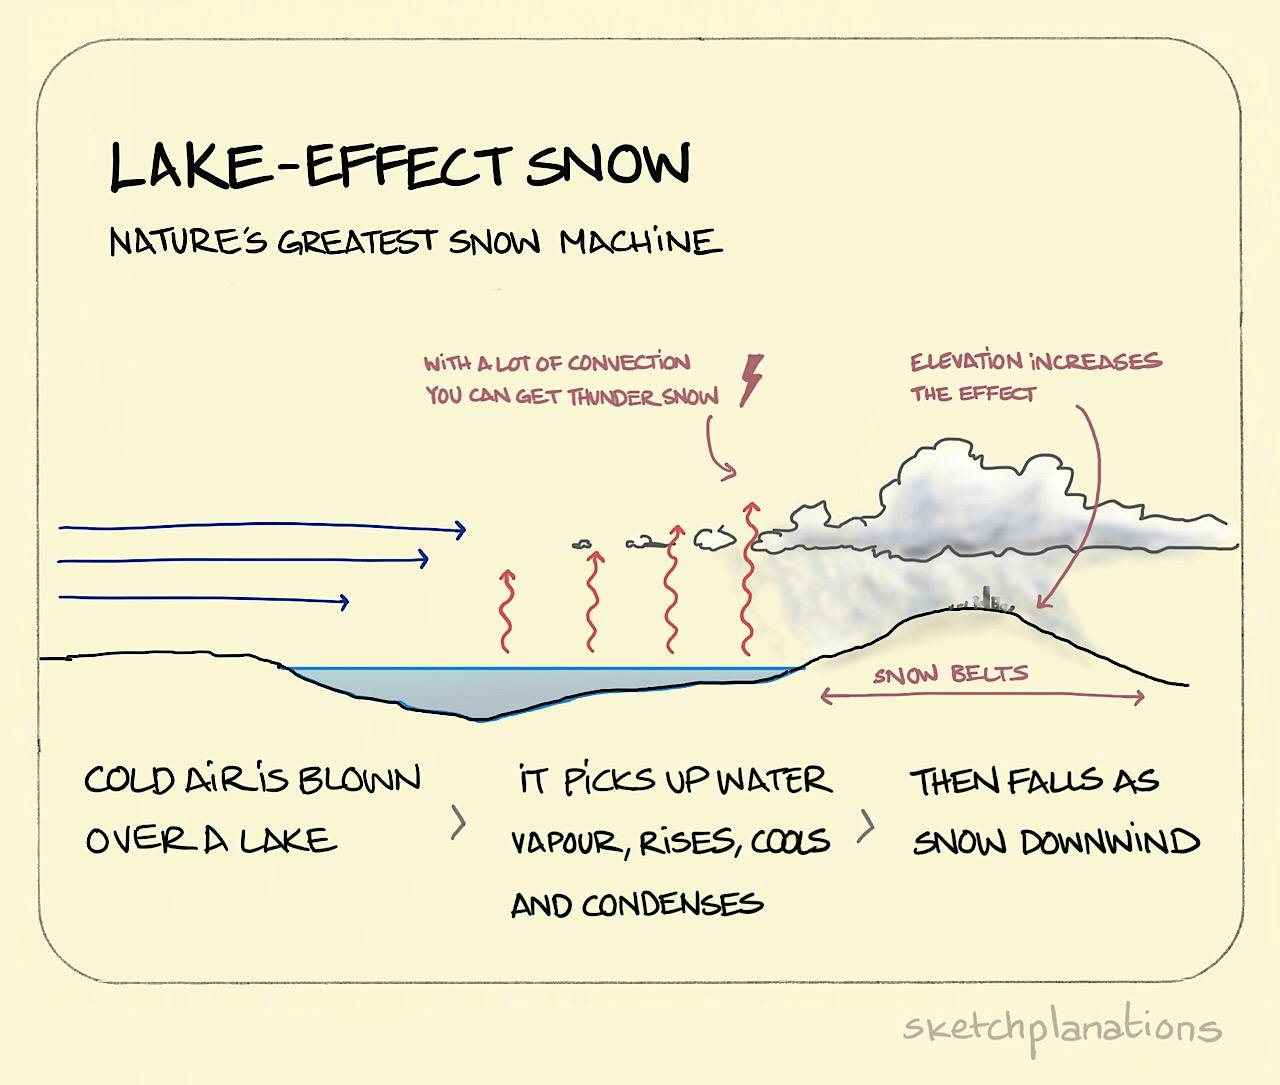 Lake-Effect Snow illustration: cold air blowing across a lake and picking up water vapour on its way, is shown to form heavy snow-producing clouds as the air hits higher ground on the other side of the lake.  